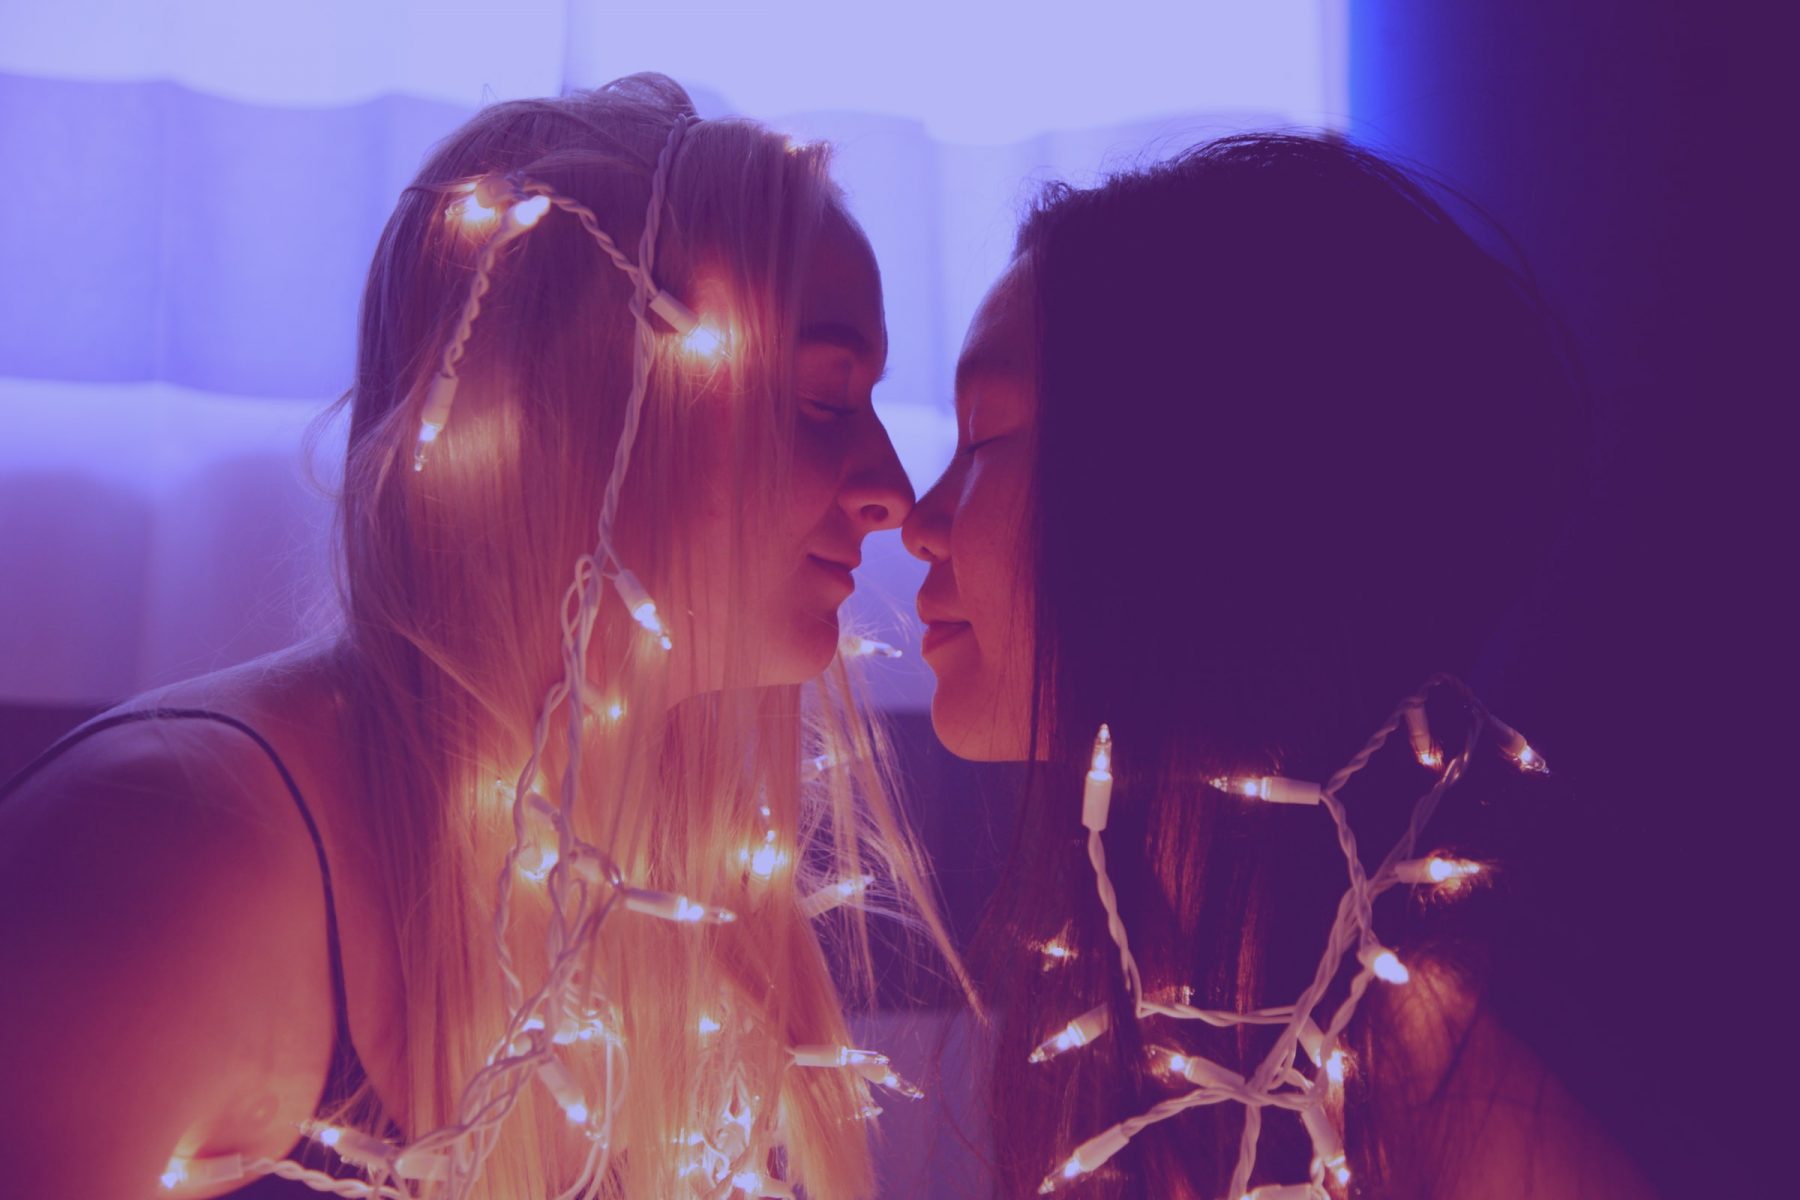 In an article about straight women using the phrase "I wish I was gay," a photo of two women in love